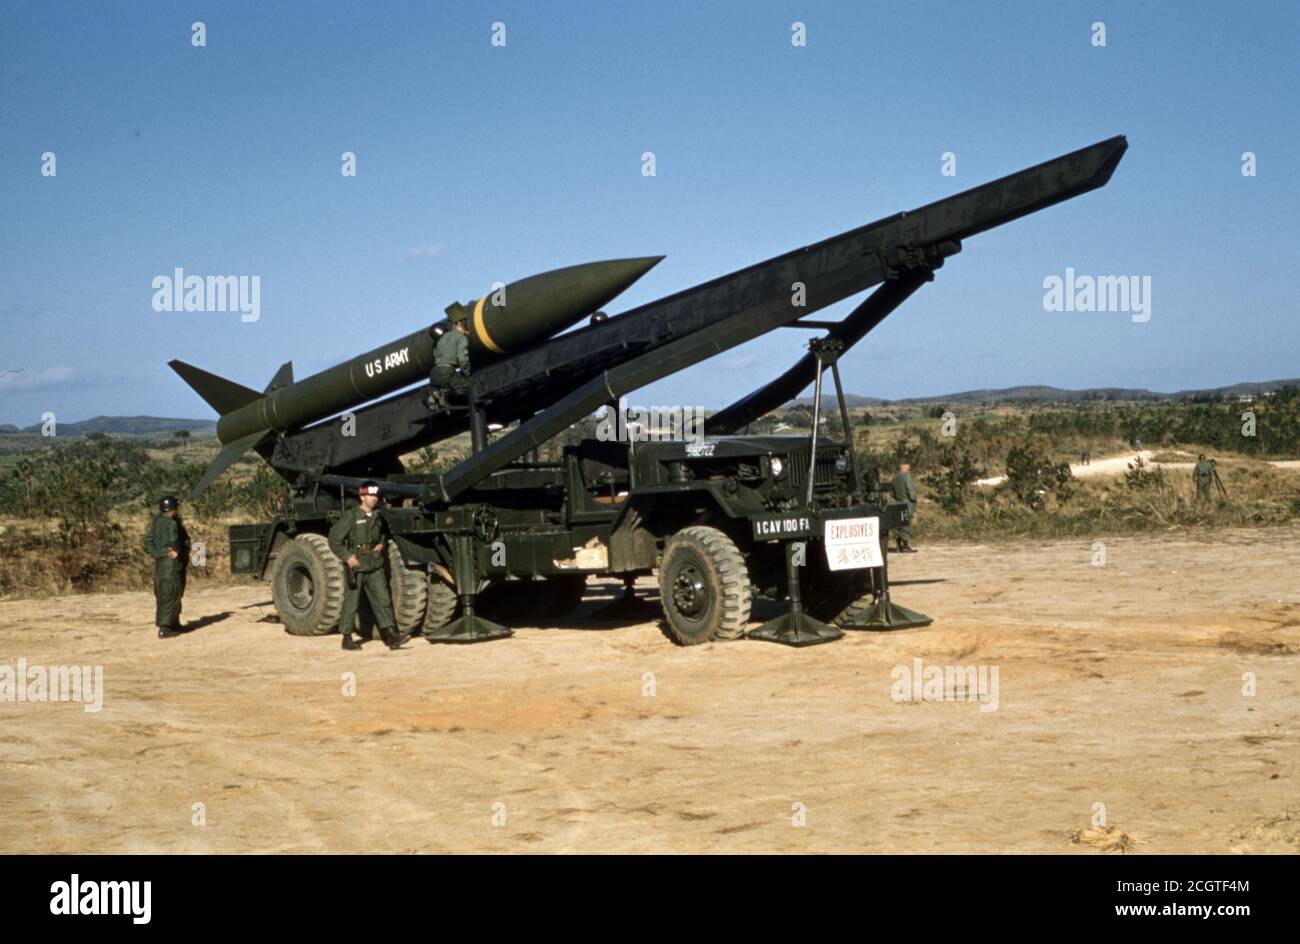 US ARMY / United States Army Kurzstreckenrakete / Surface to Surface Missile MGR-1 Honest John Stock Photo